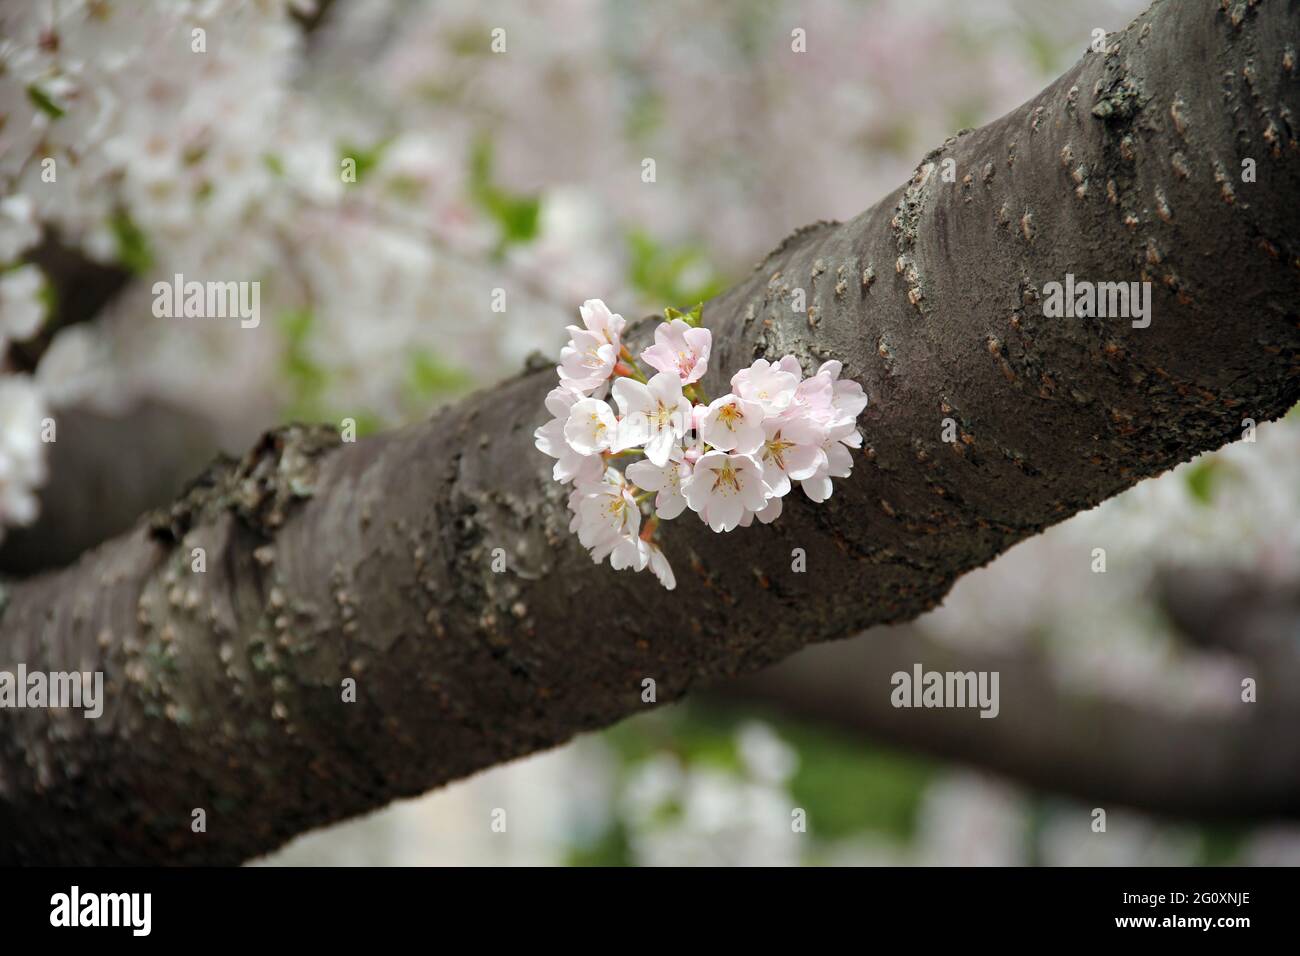 Prunus ‘Pink Shell’ ornamental cherry tree blossom on branch during a sunny warm spring day Stock Photo